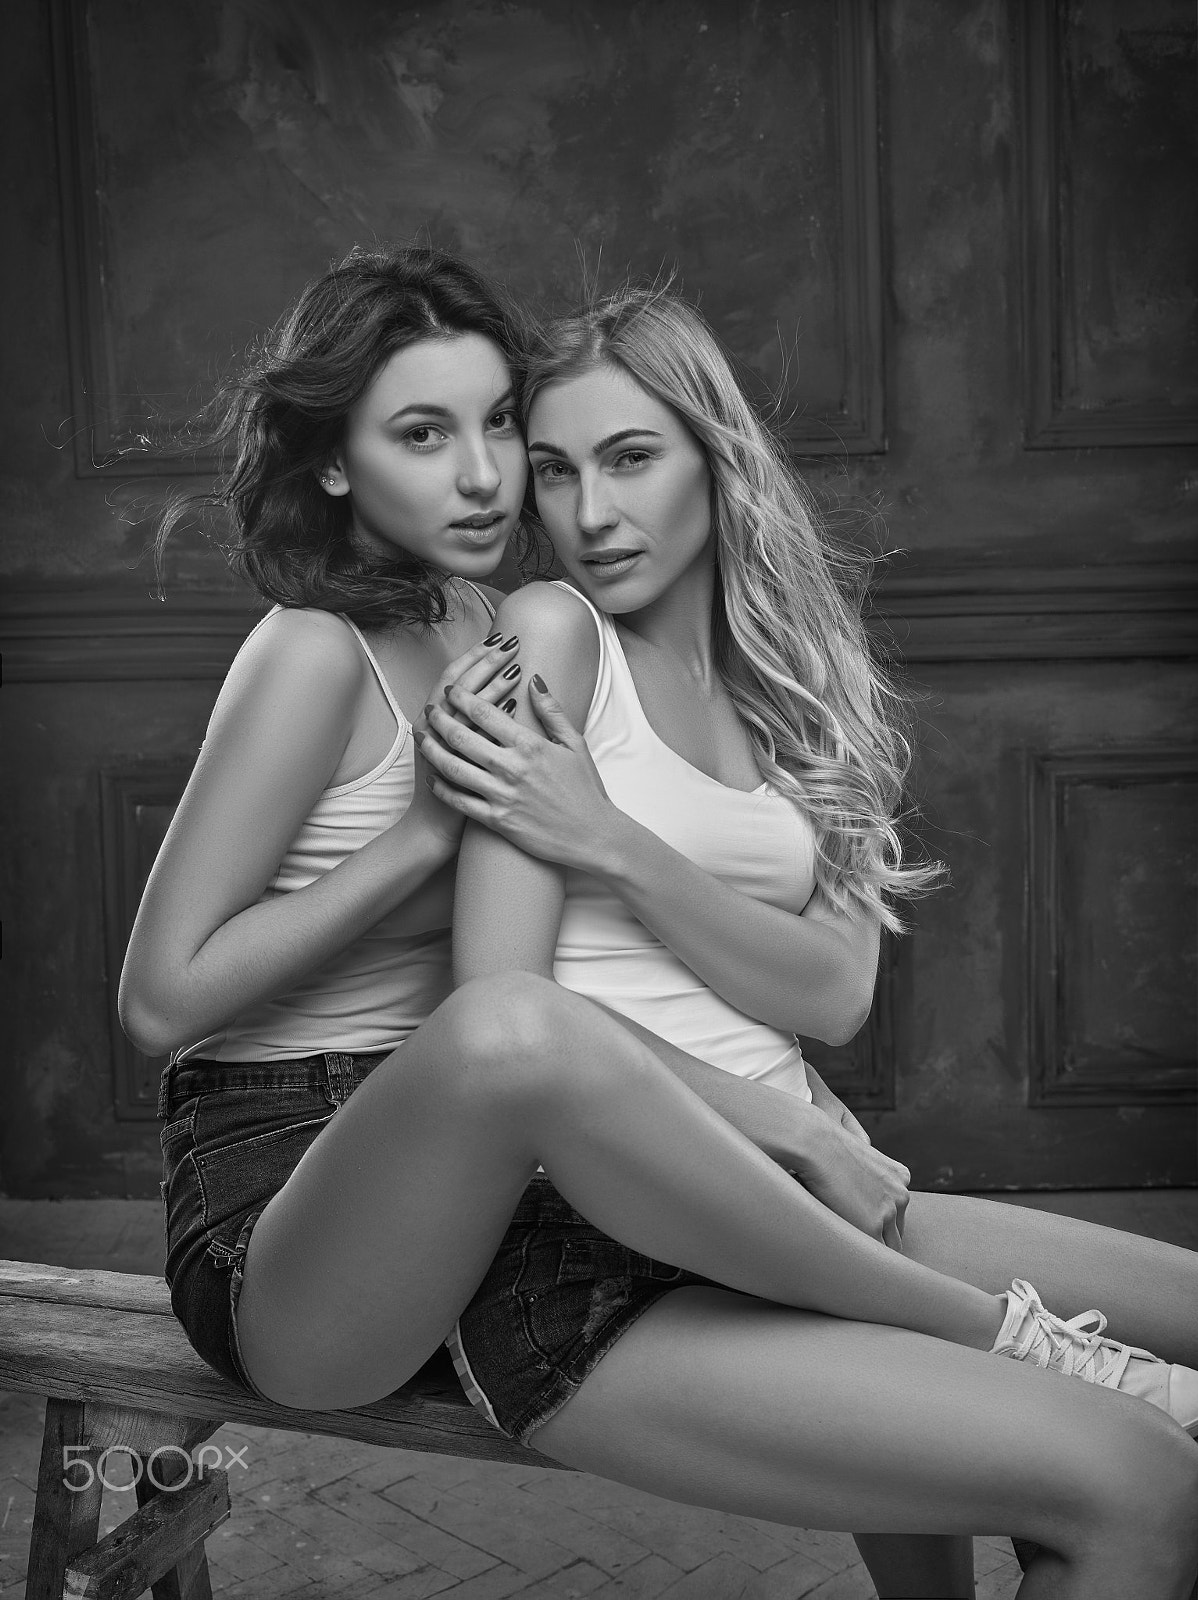 Phase One IQ160 sample photo. Two beautiful women in erotic lingerie photography